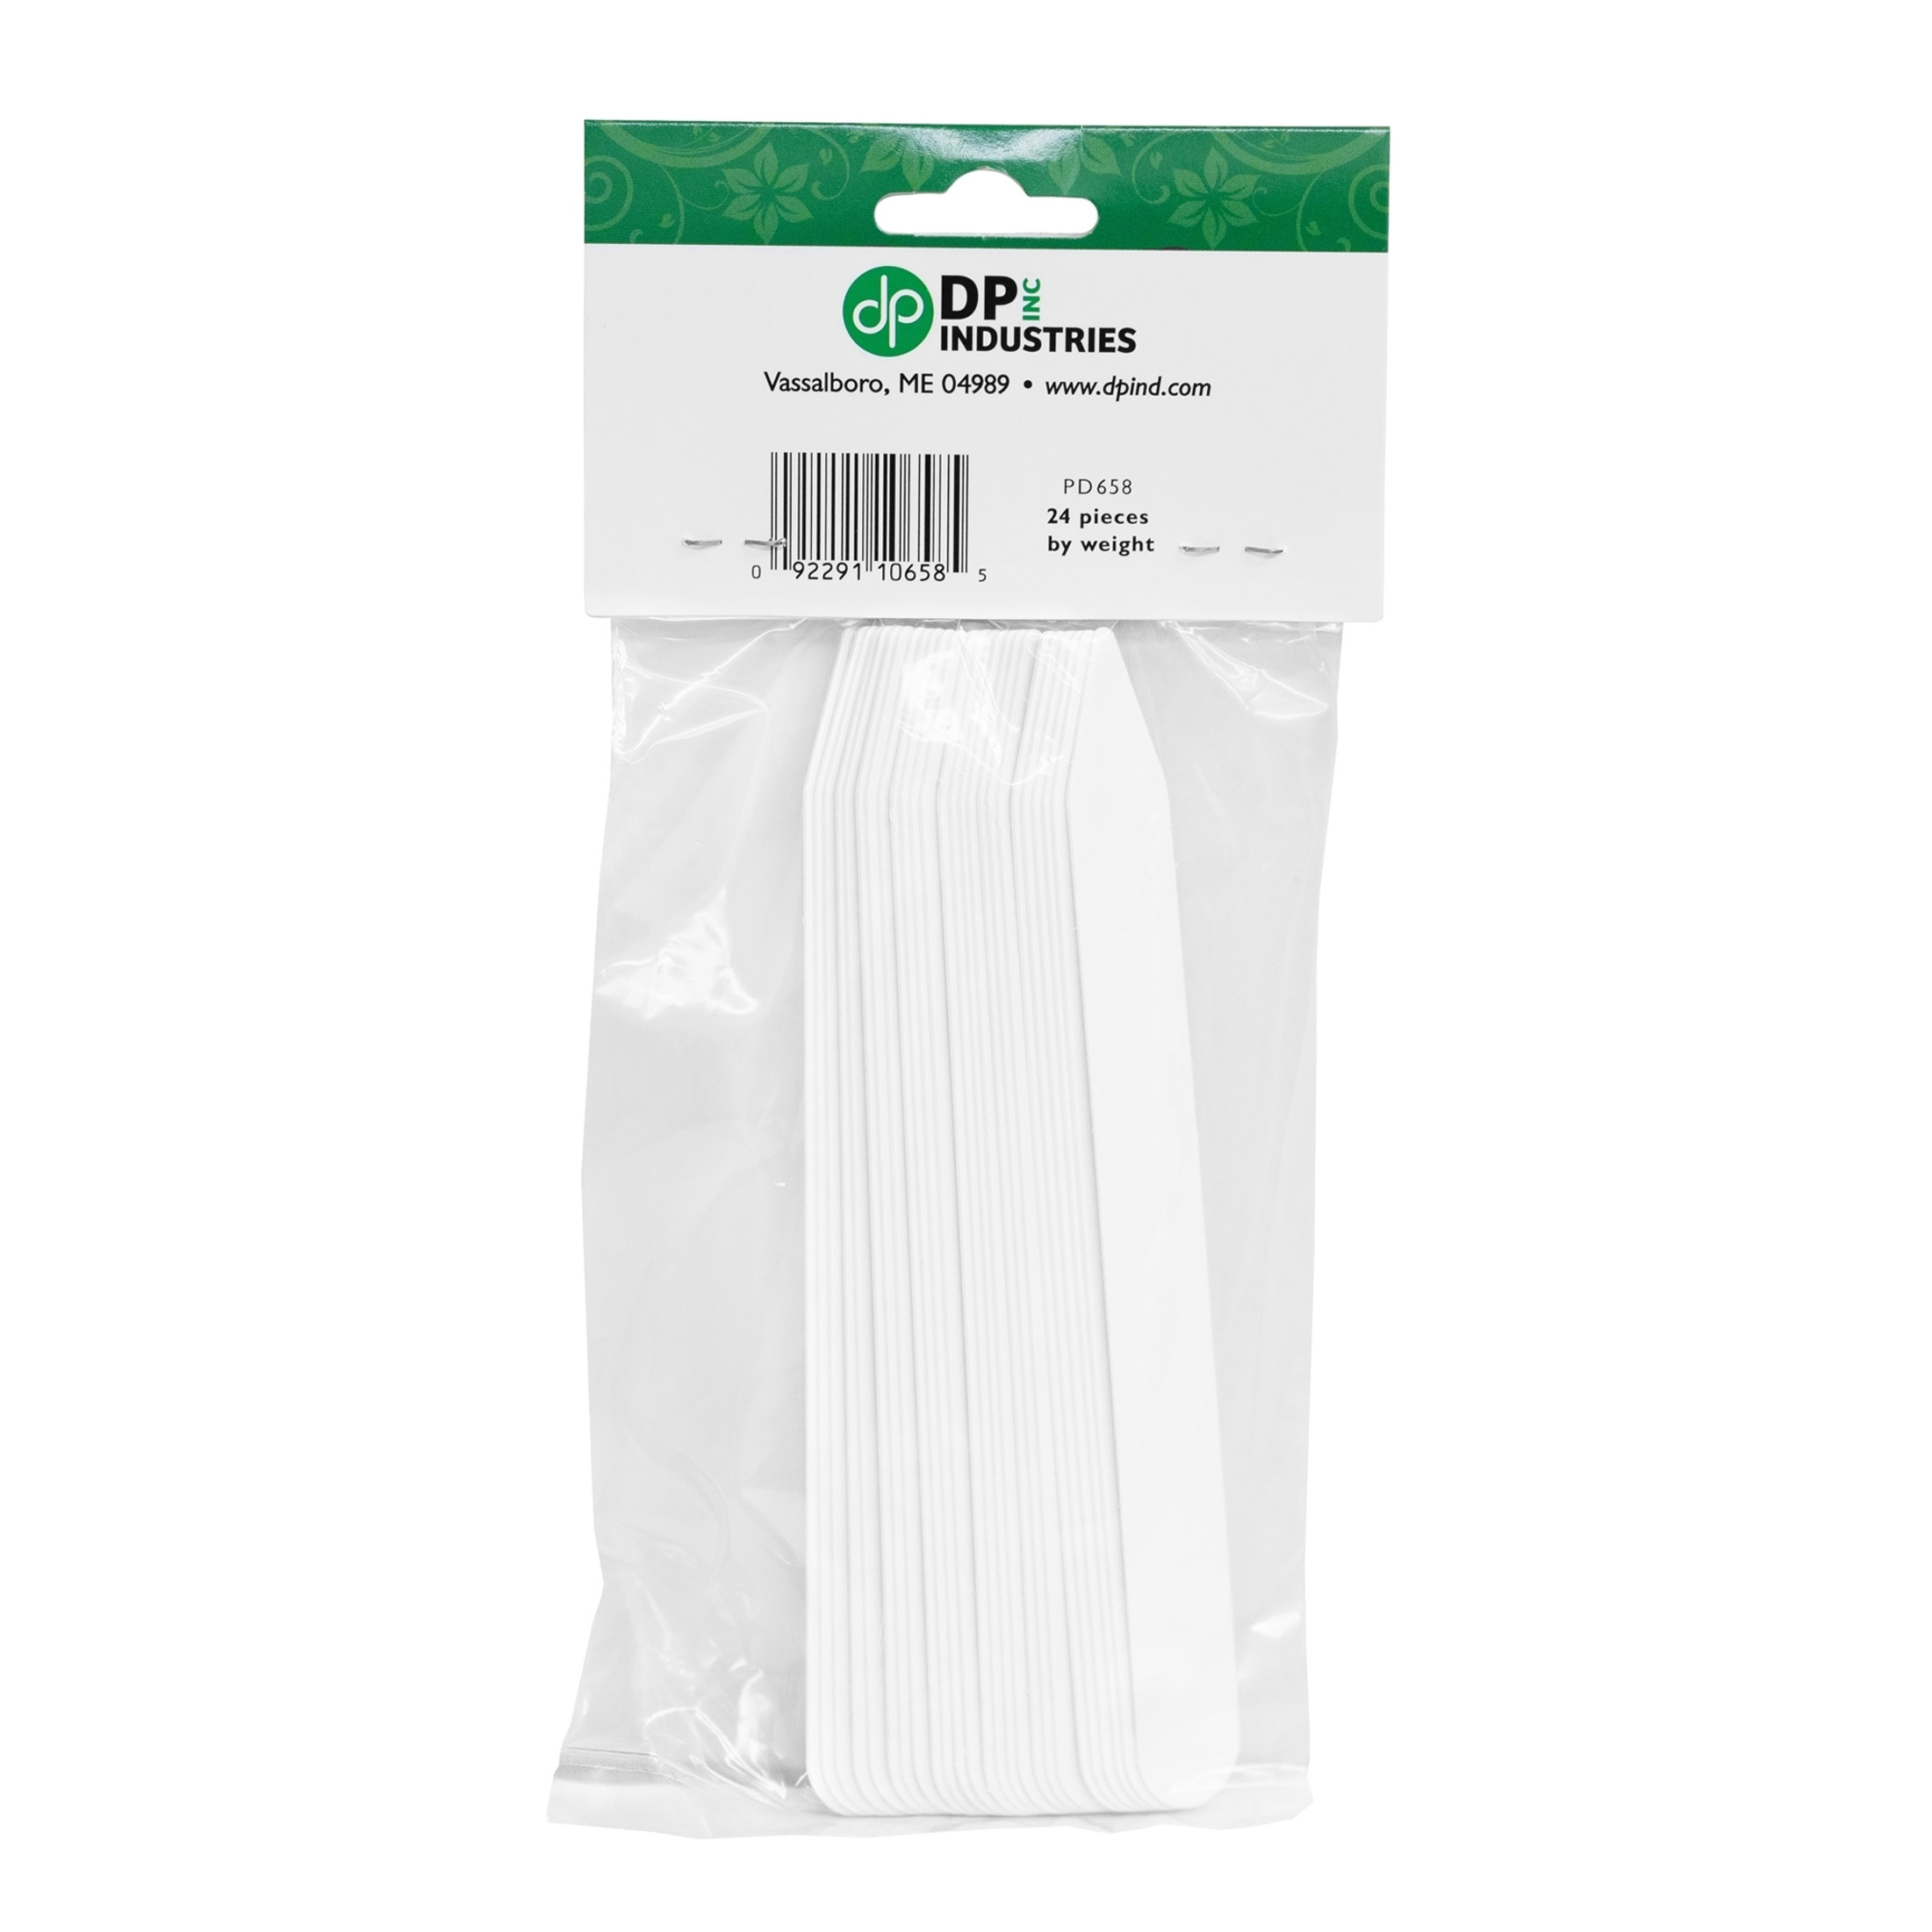 DP Industries Garden Aces Plastic Plant Stakes, White, 6" (Qty 24)